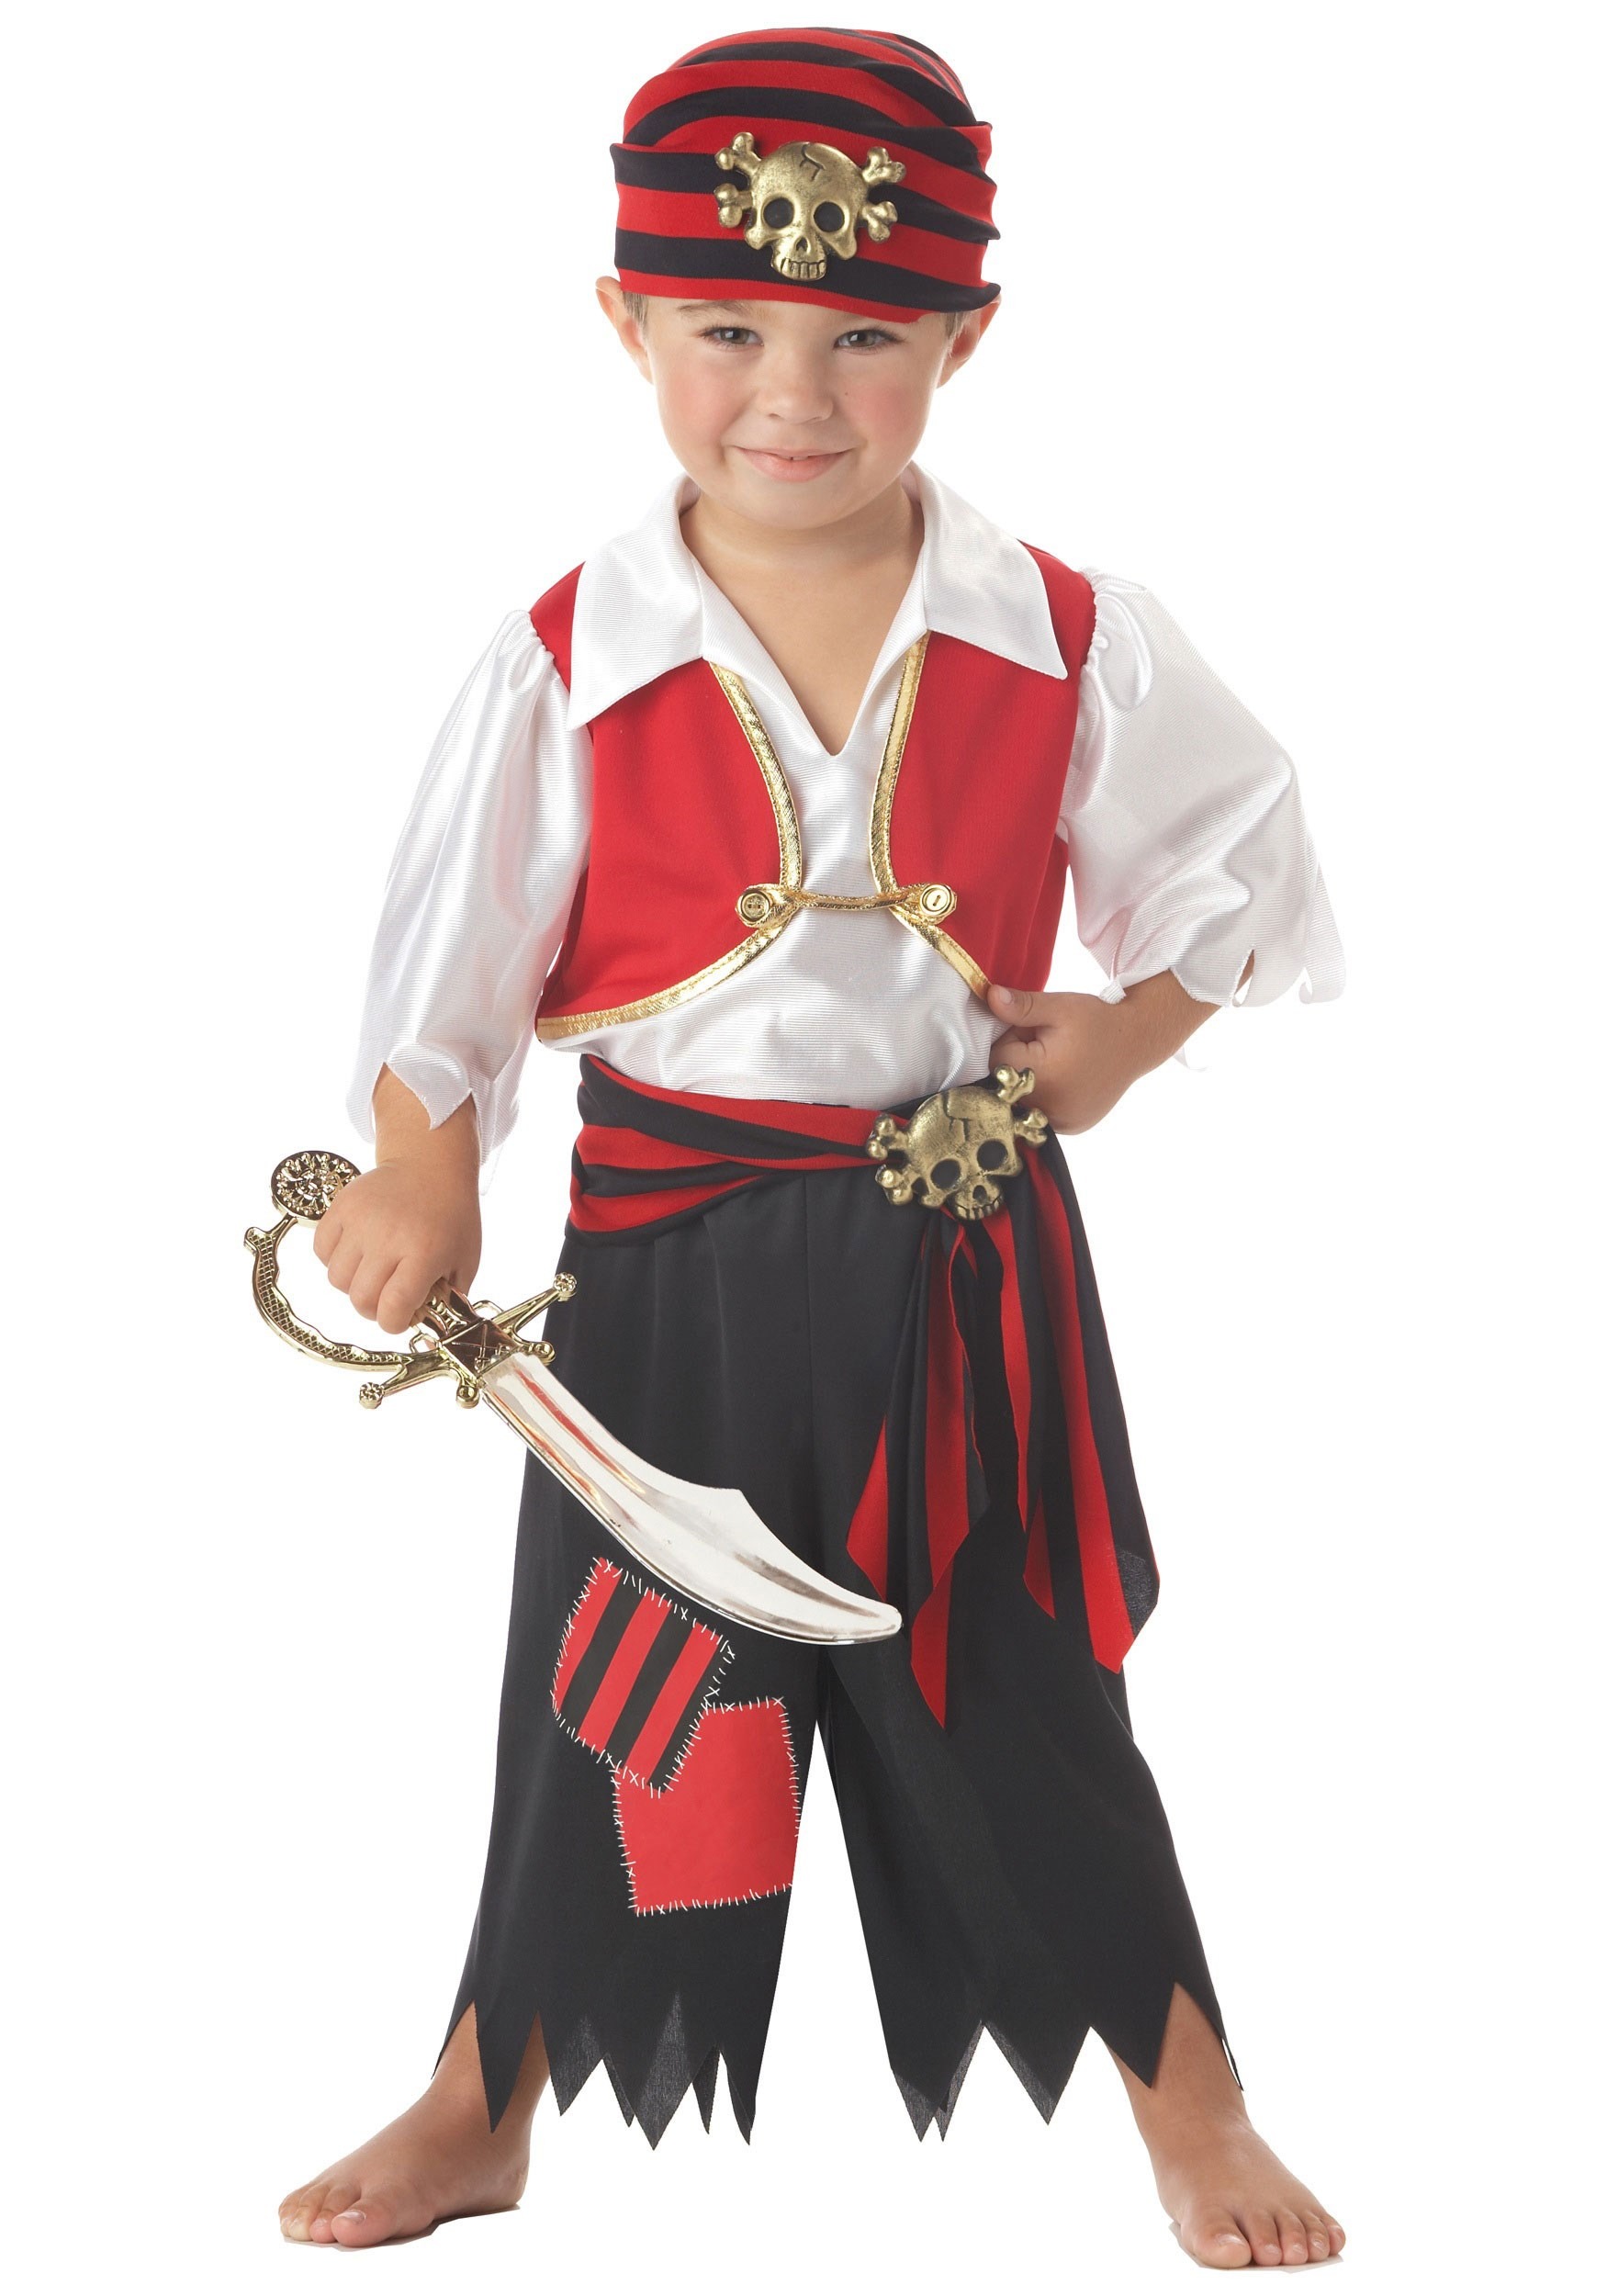 Ahoy Matey Pirate Costume for Toddlers